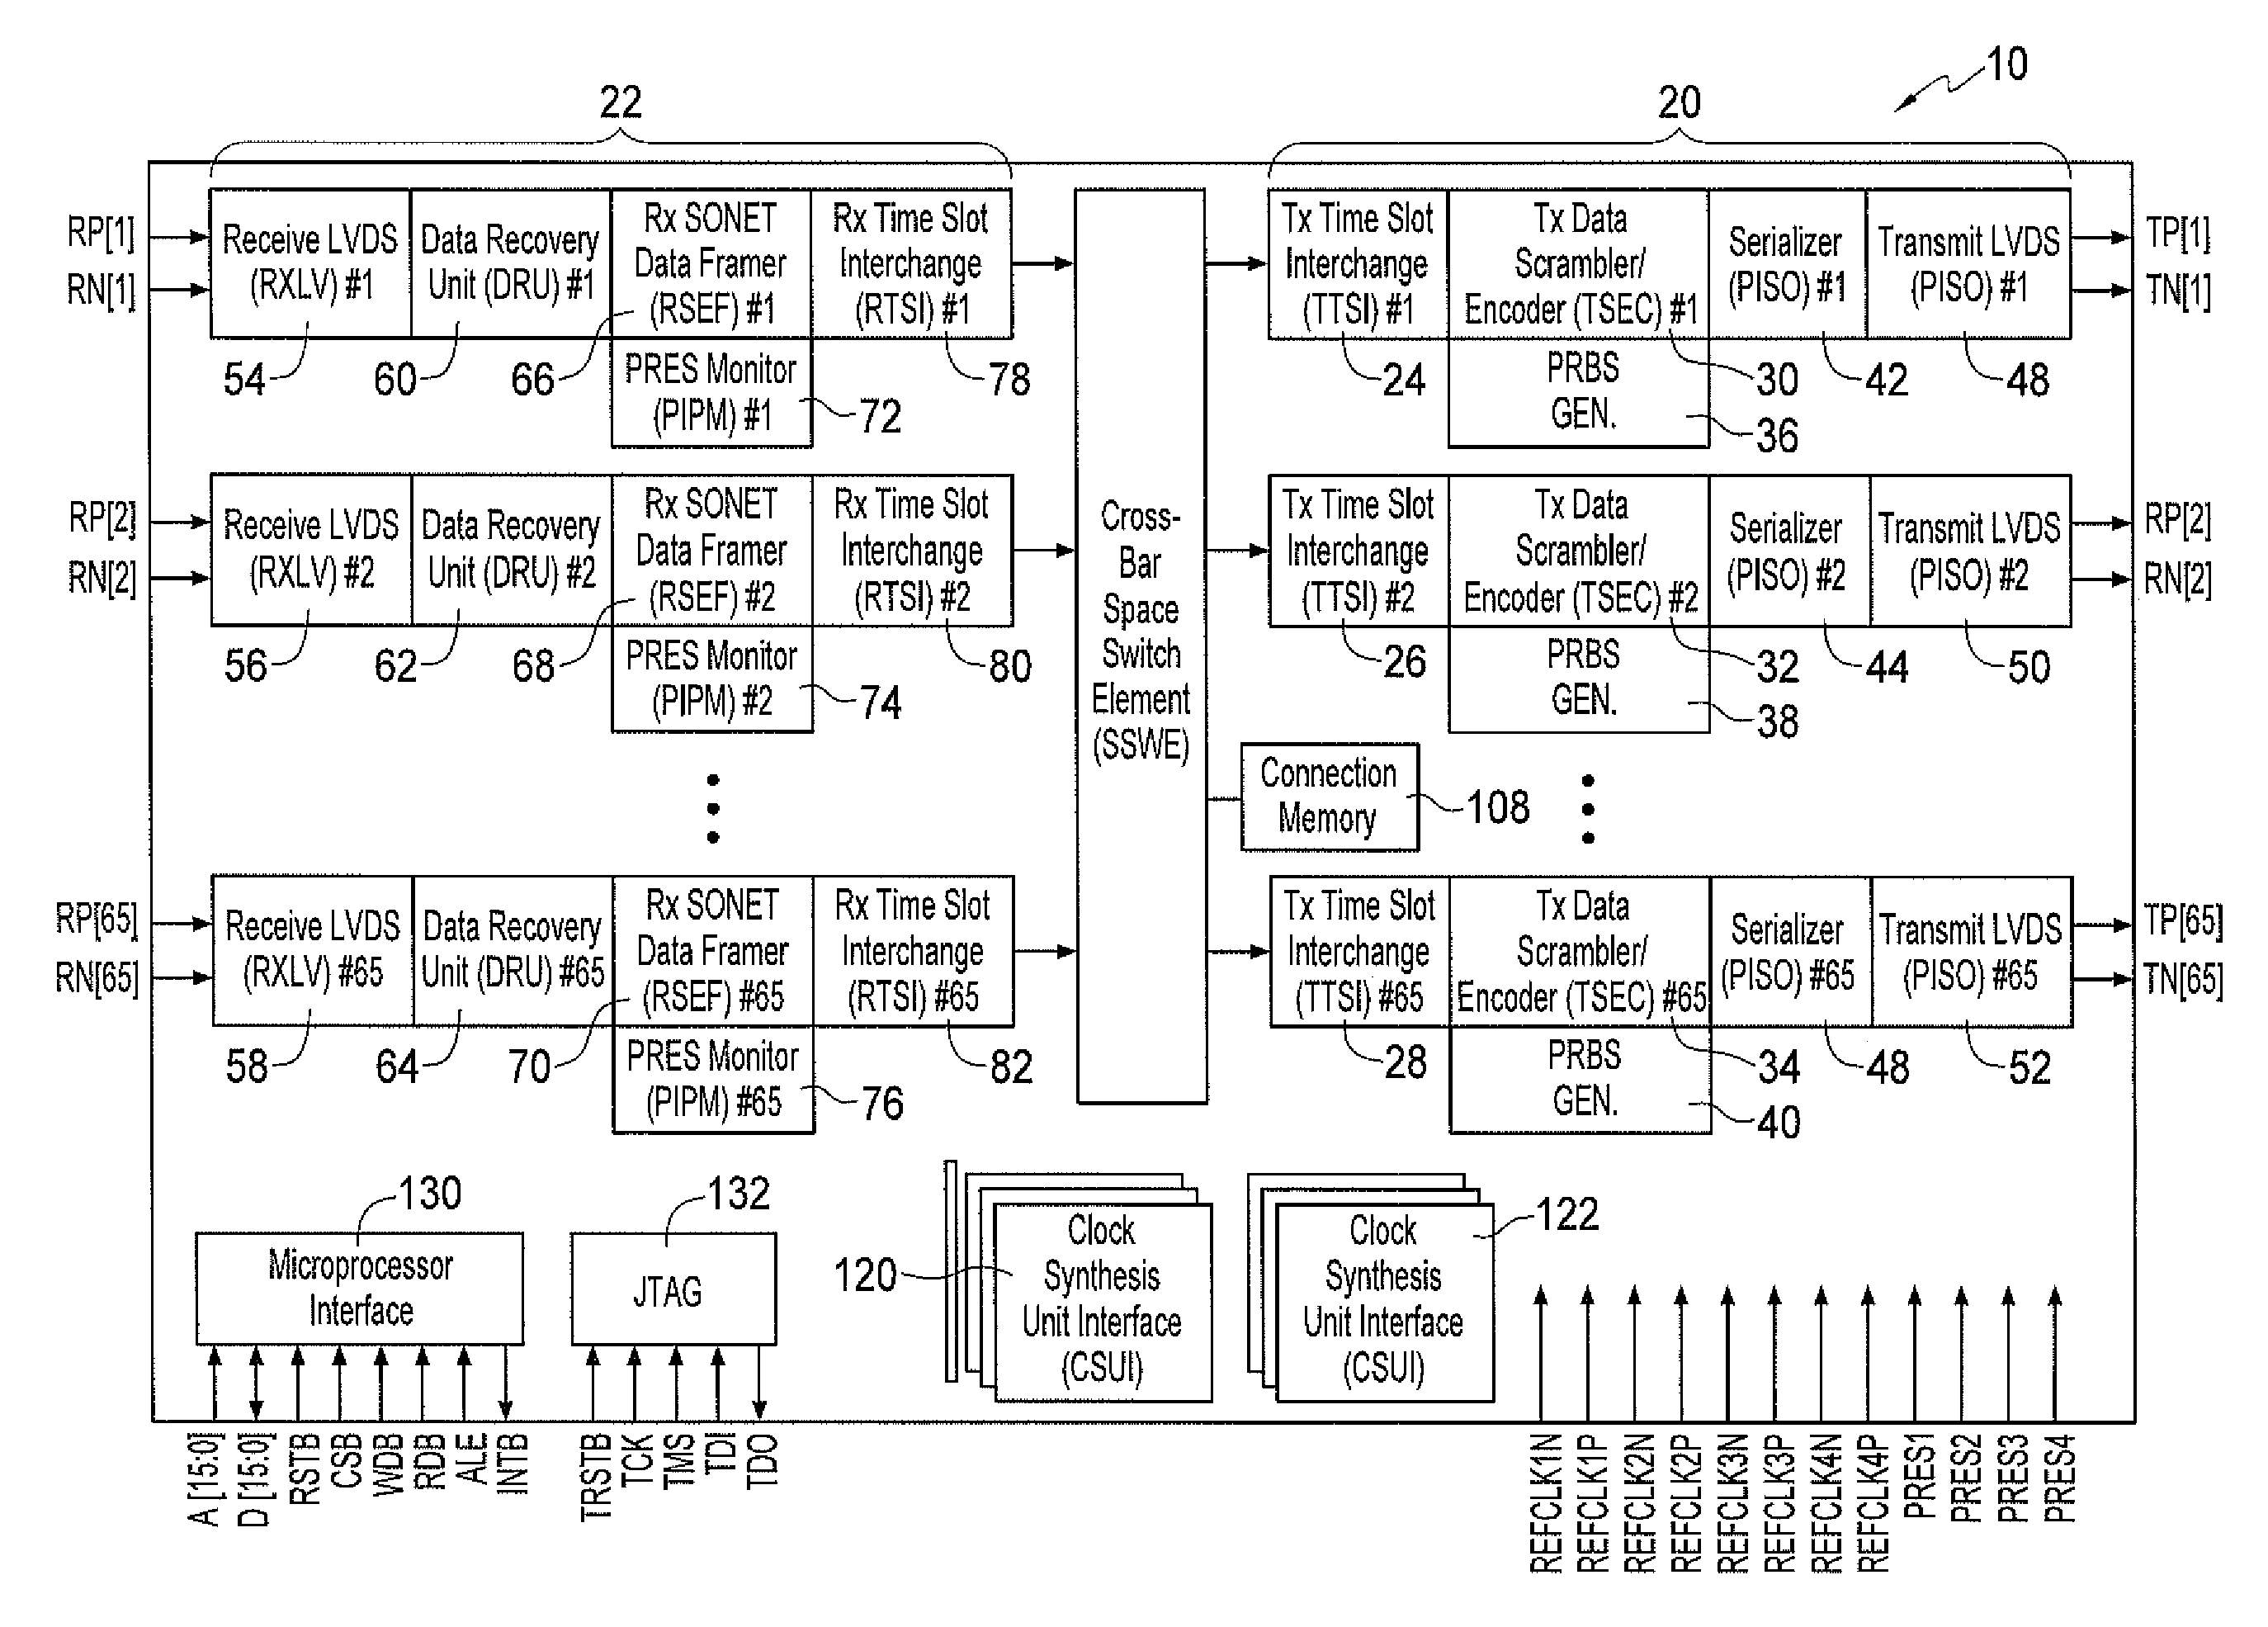 Bus interface for transfer of multiple SONET/SDH rates over a serial backplane